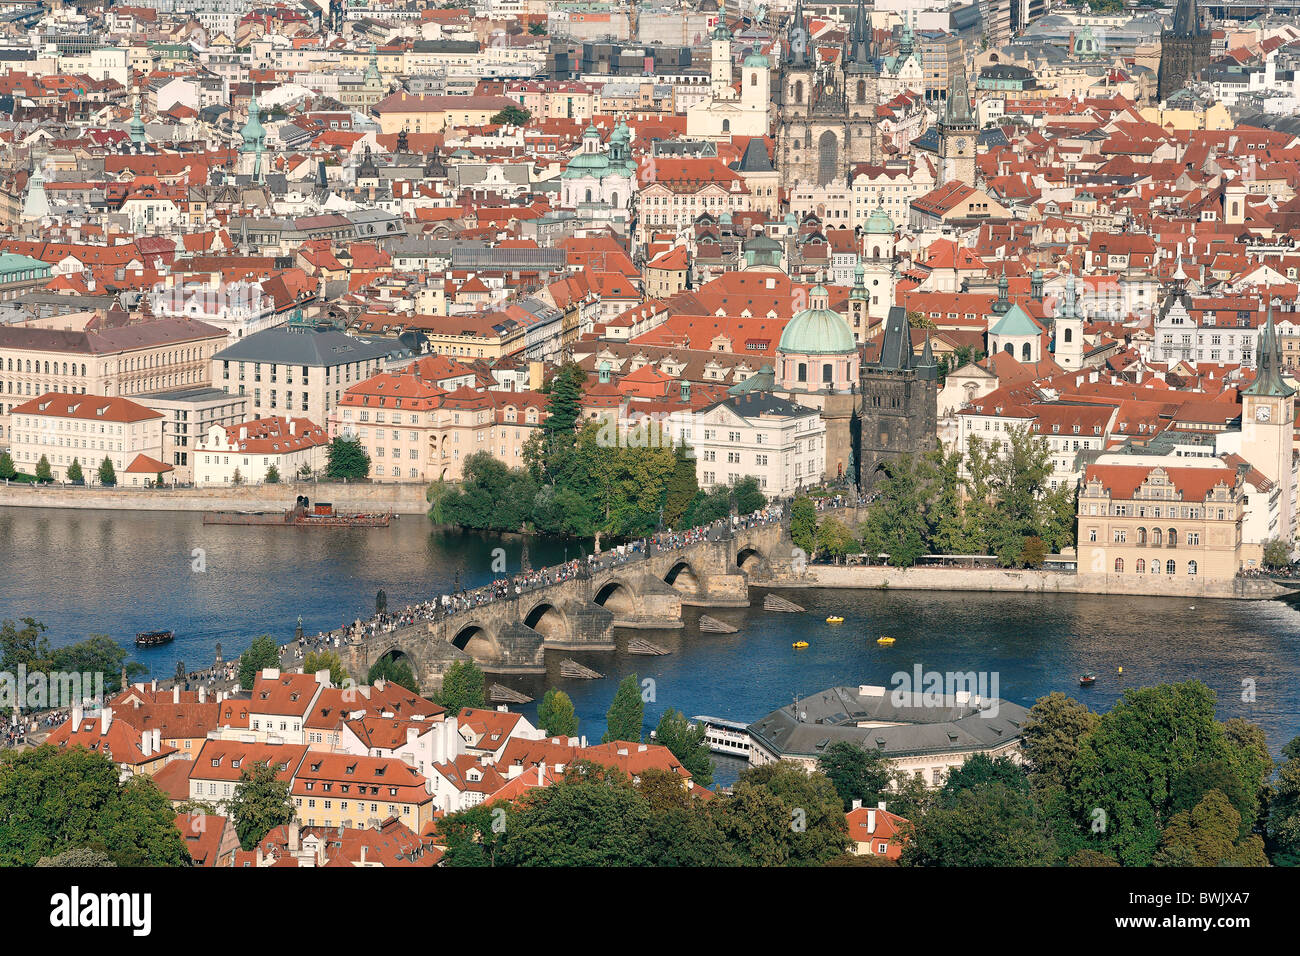 Aerial view Aerial views Architecture Boat Boats Building Buildings Charles Bridge Cities City City planning Stock Photo